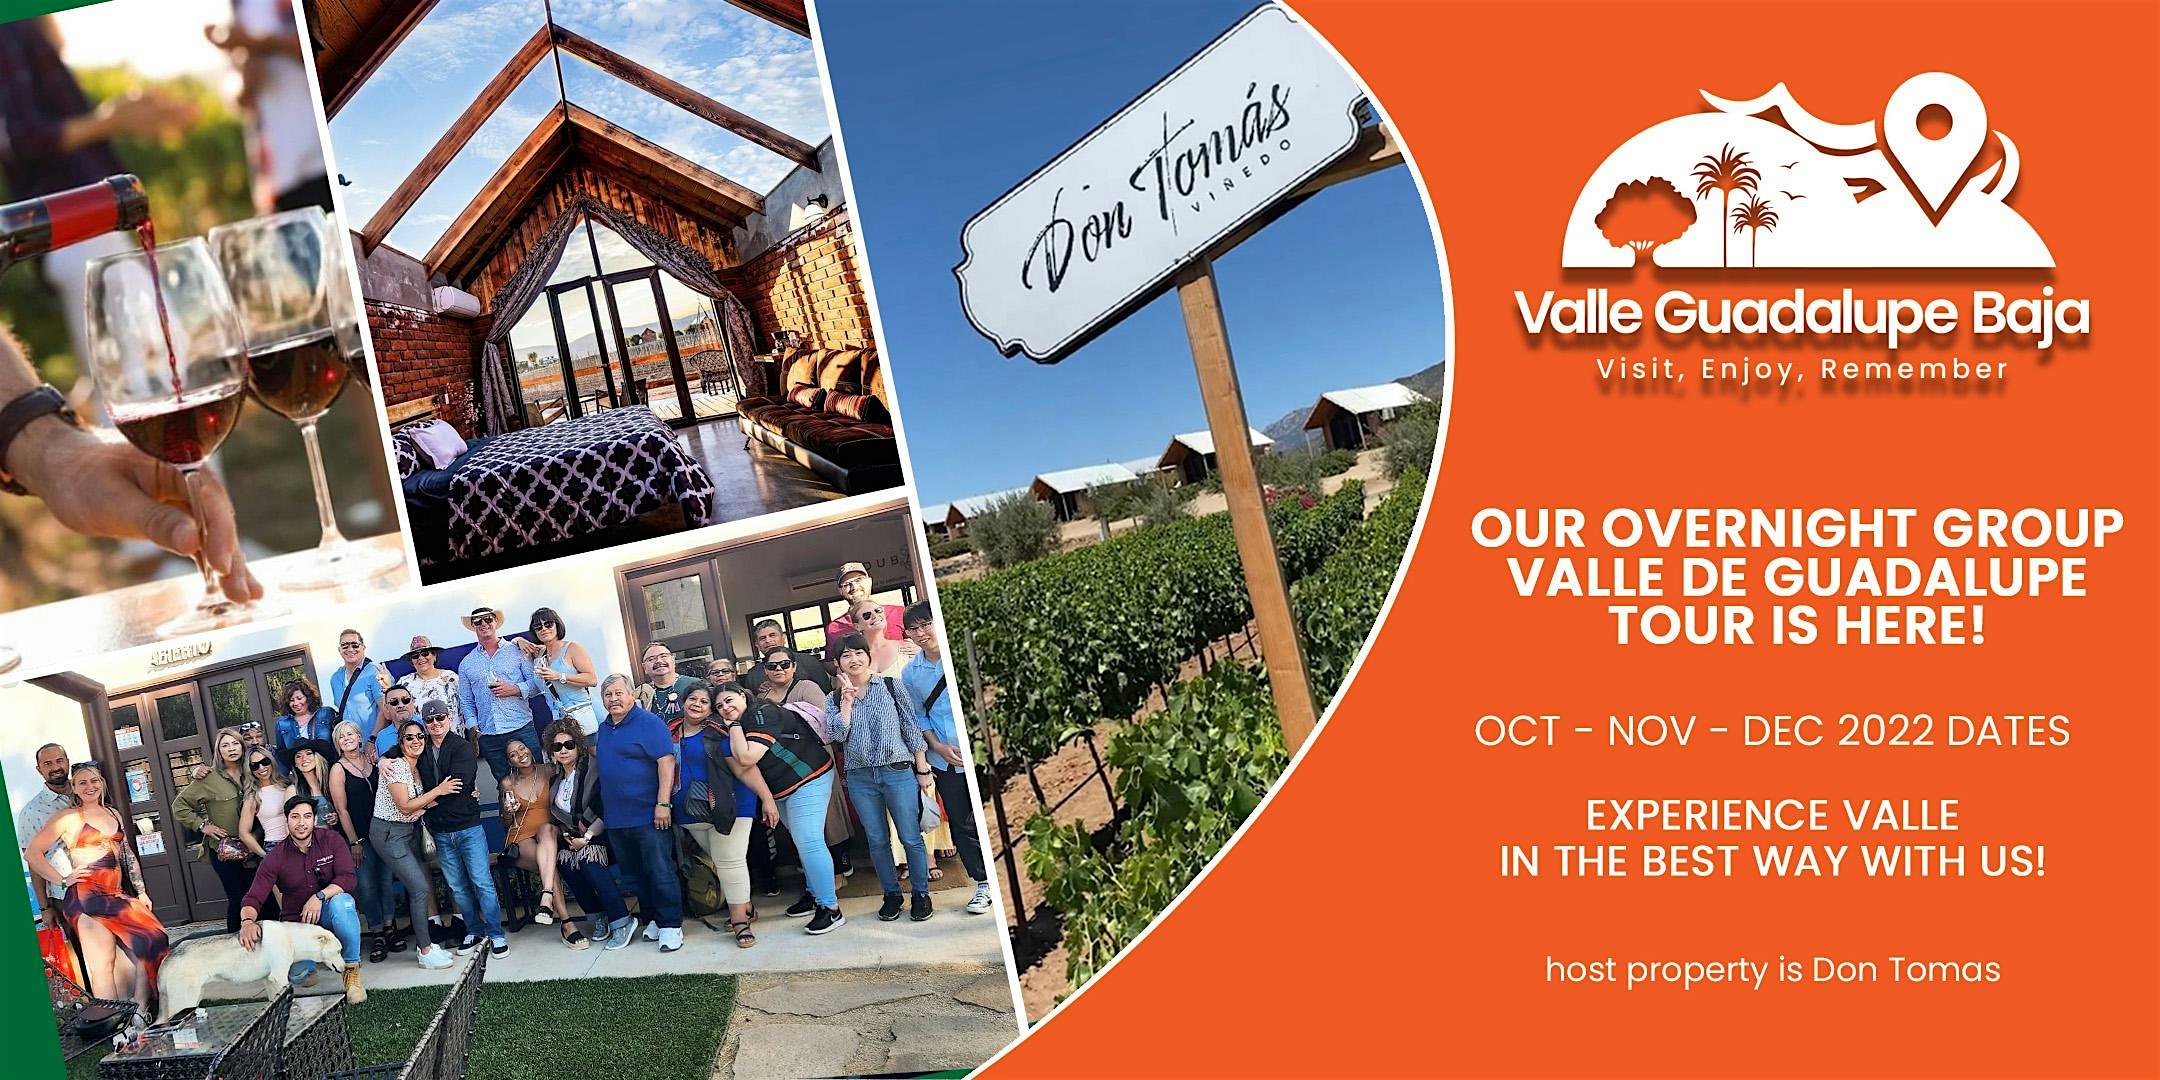 Overnight Valle de Guadalupe Group Tour - Vineyard Wine, Campfire & Amigos